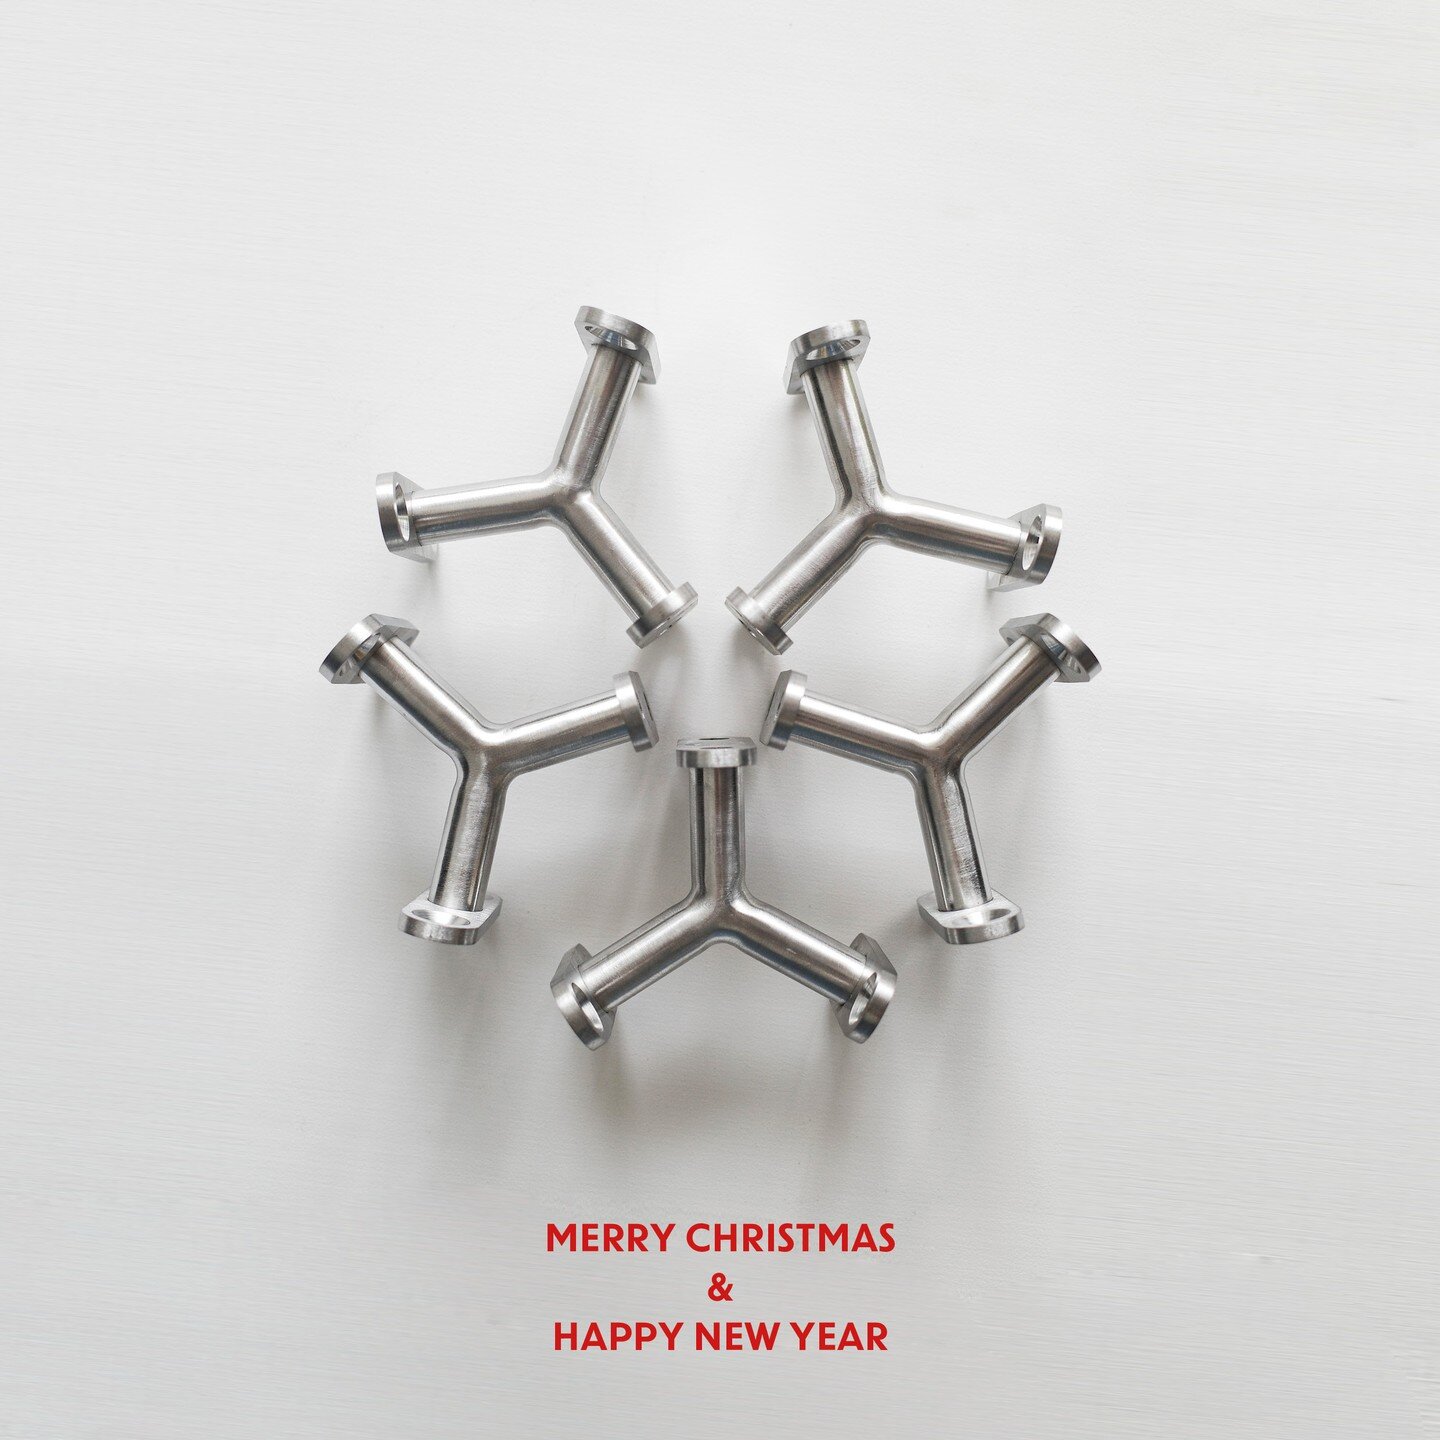 It has been a great year for us here at Mowat &amp; Company working with a great team of collaborators &amp; clients.

As we draw gradually to a close for the festive season, we wish you all a very Merry Christmas &amp; happy New Year.

Our Snowflake